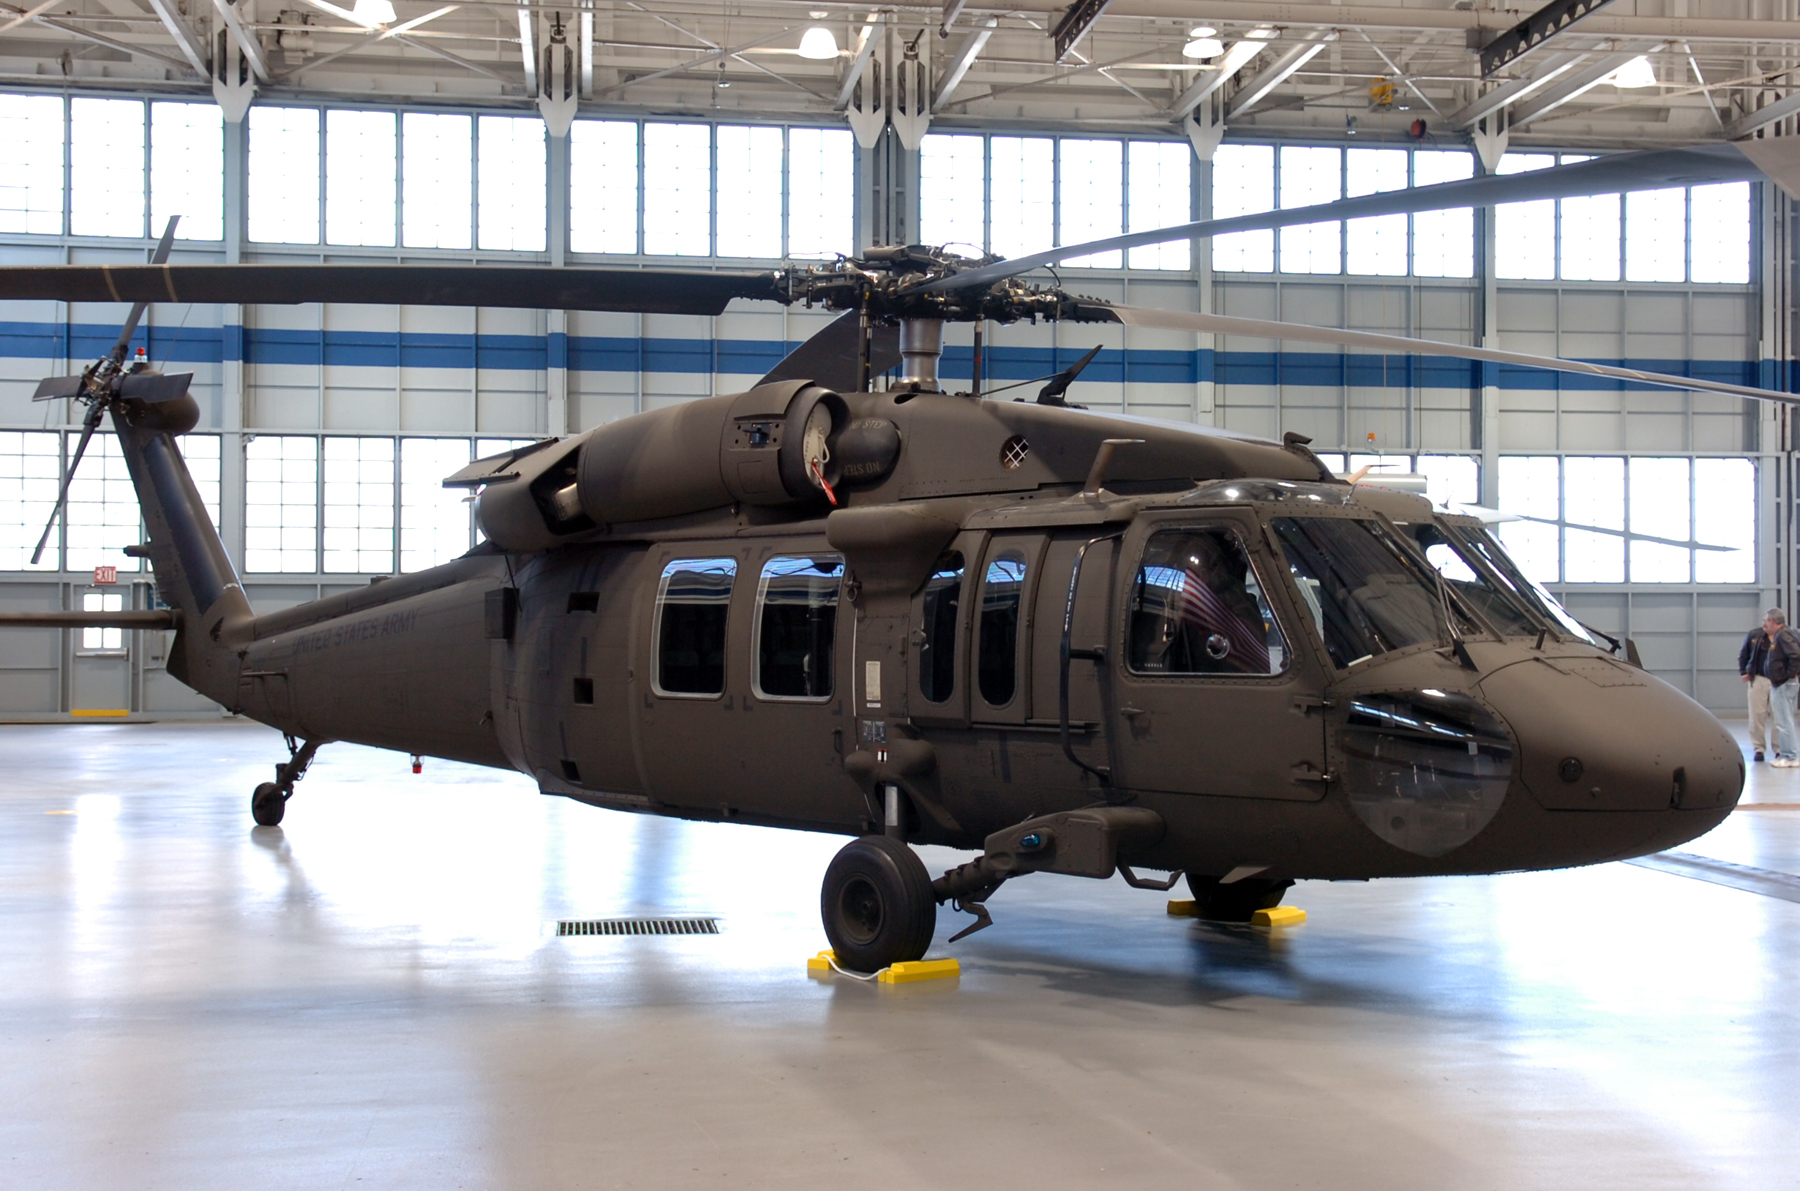 Sikorsky's UH-60M Black Hawk for the U.S. Army, seen here in the Military Hangar at Sikorsky Aircraft in Stratford, Conn. Feb. 20, 2008.